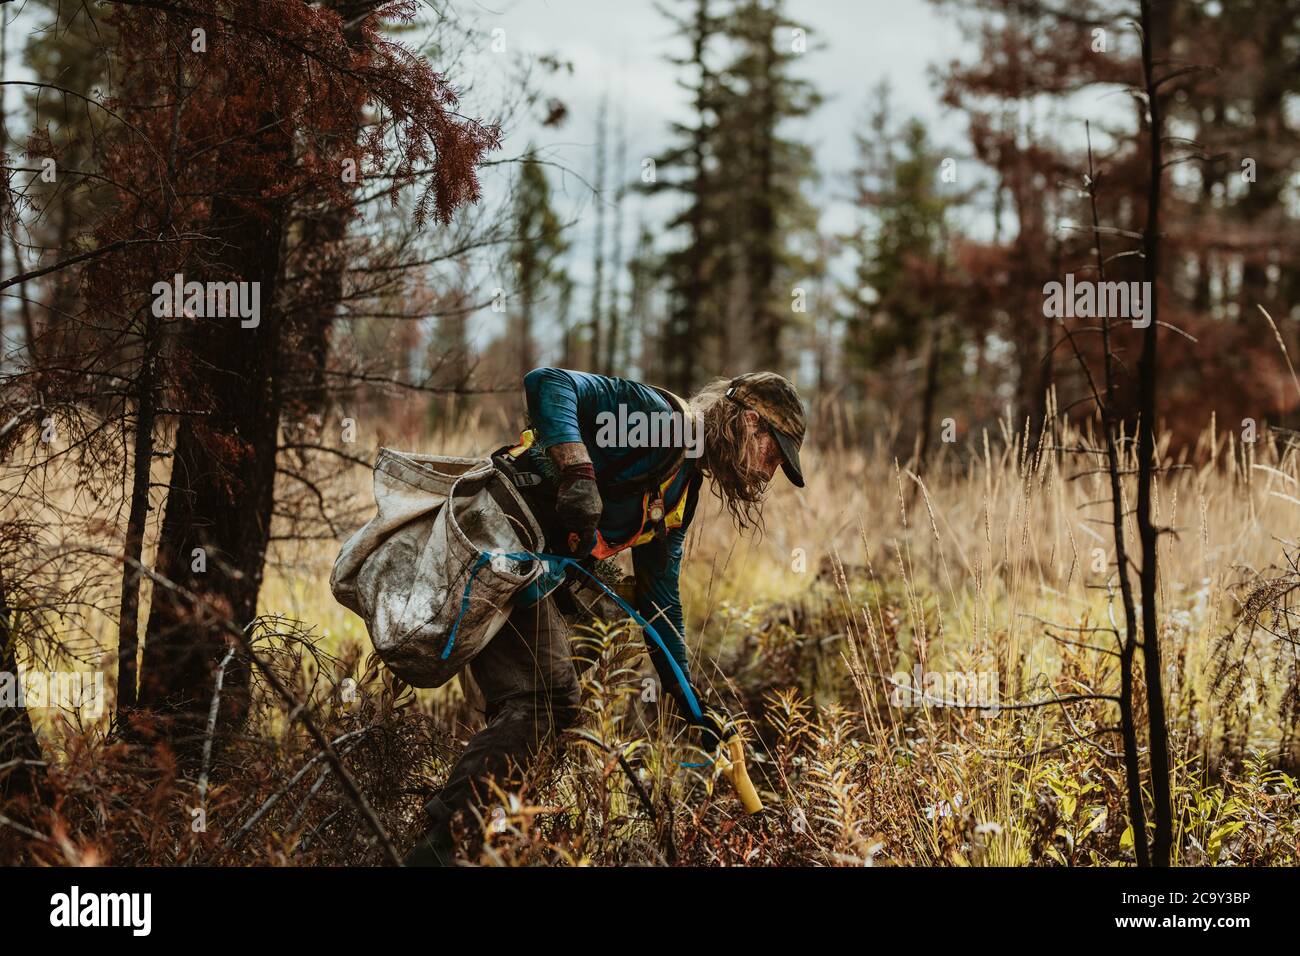 Forester planting new small trees in forest. Man digging hole with shovel to plant saplings in forest. Stock Photo